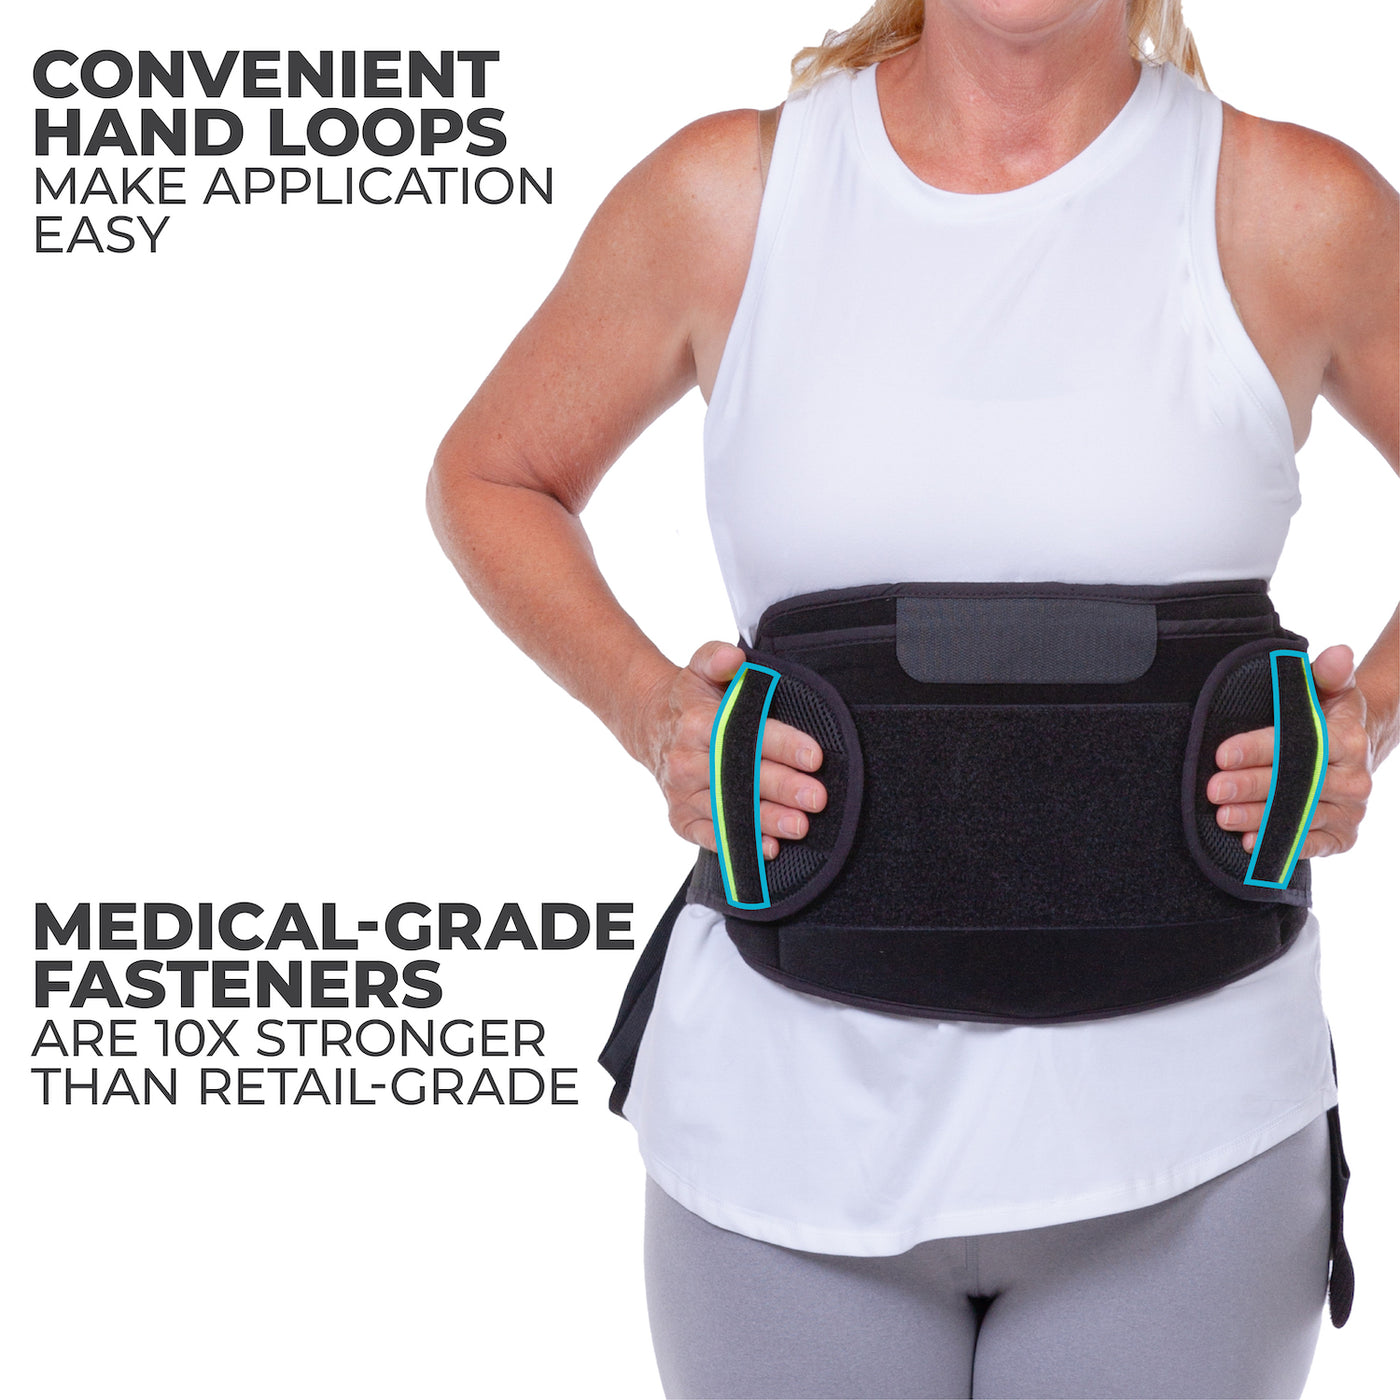 hand loops make putting on the sciatica lso back brace easy to apply even with arthritis